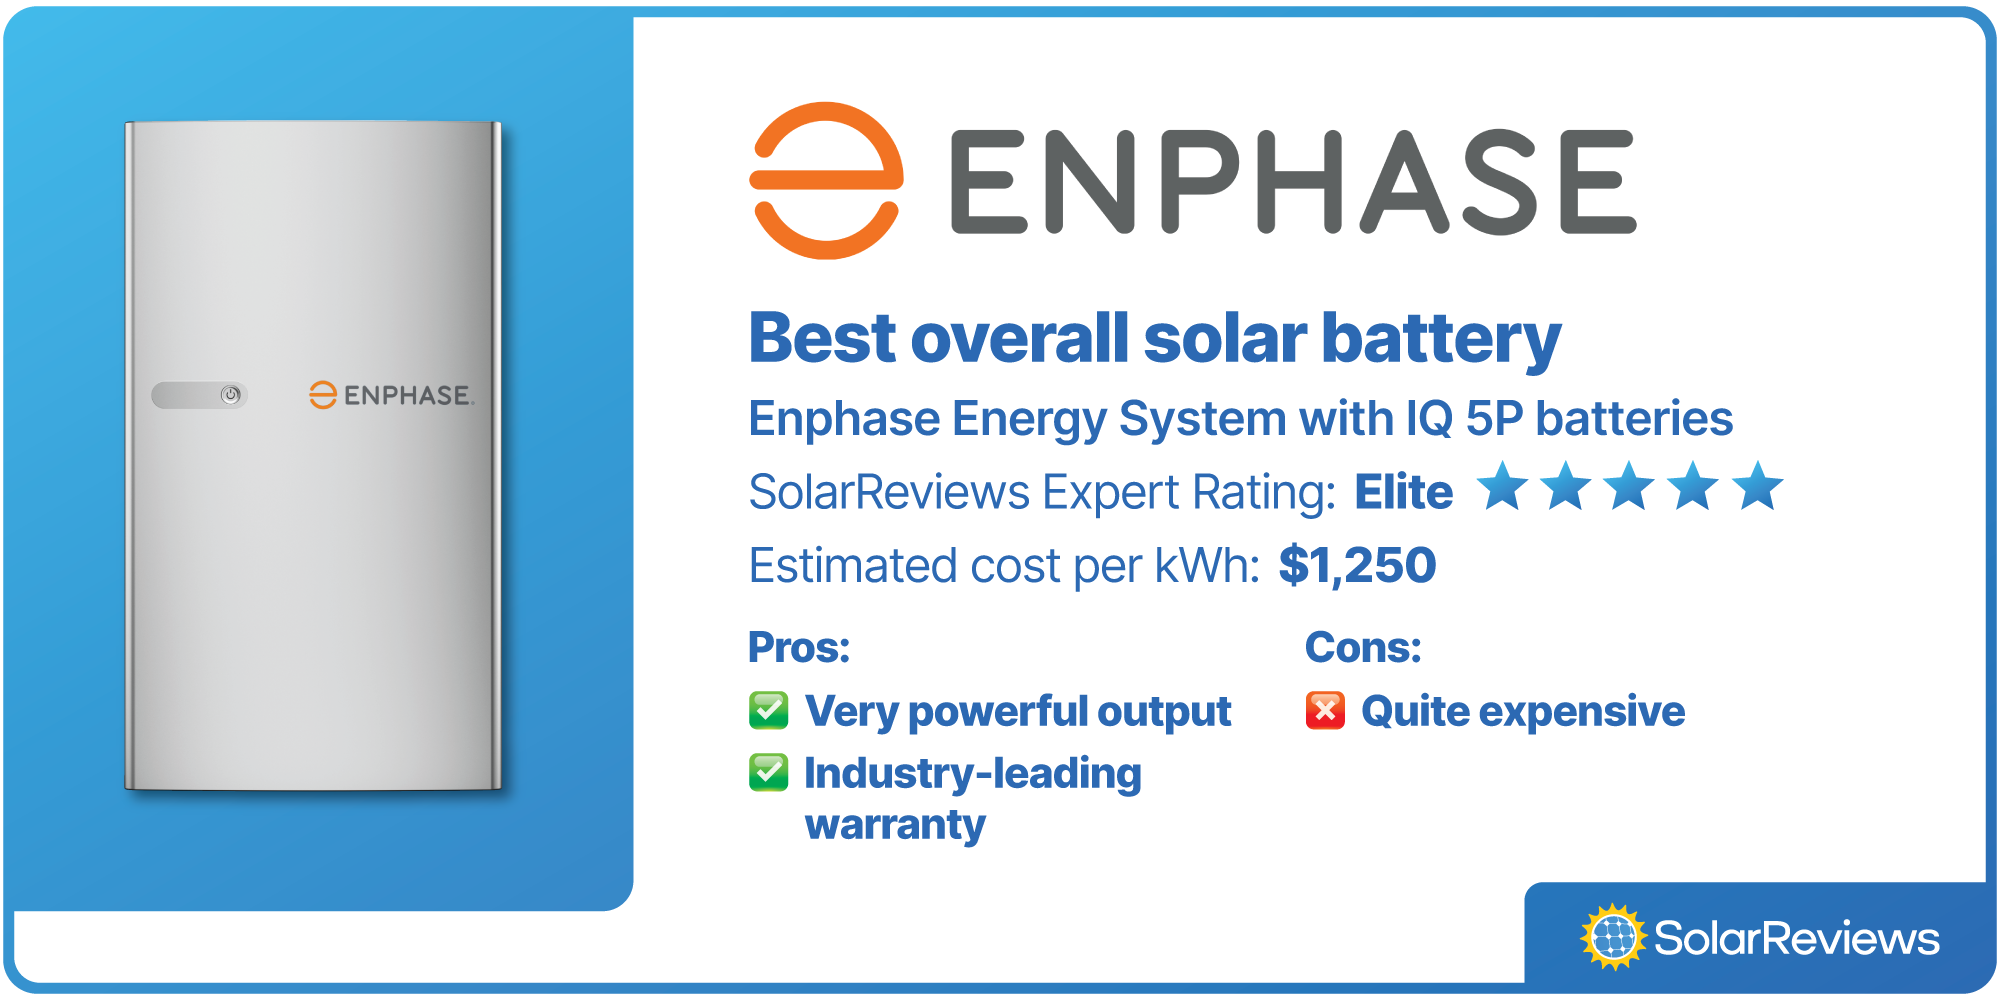 Enphase was voted best overall solar battery, with a SolarReviews rating of Elite (5 stars), and estimated cost per kWh of $1,250.